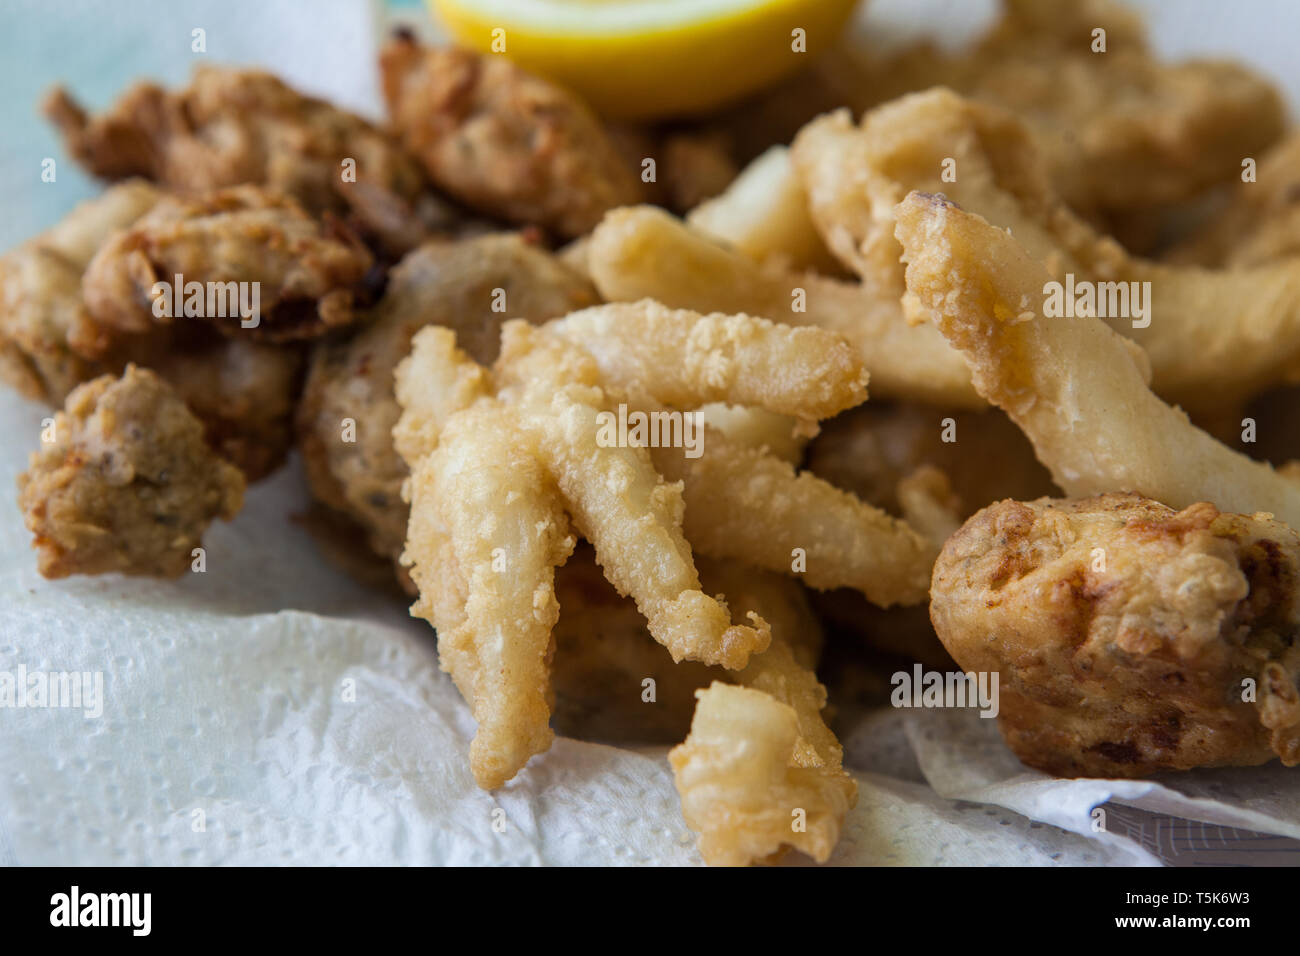 deep fried squid and fish on olive oil with lemon Stock Photo